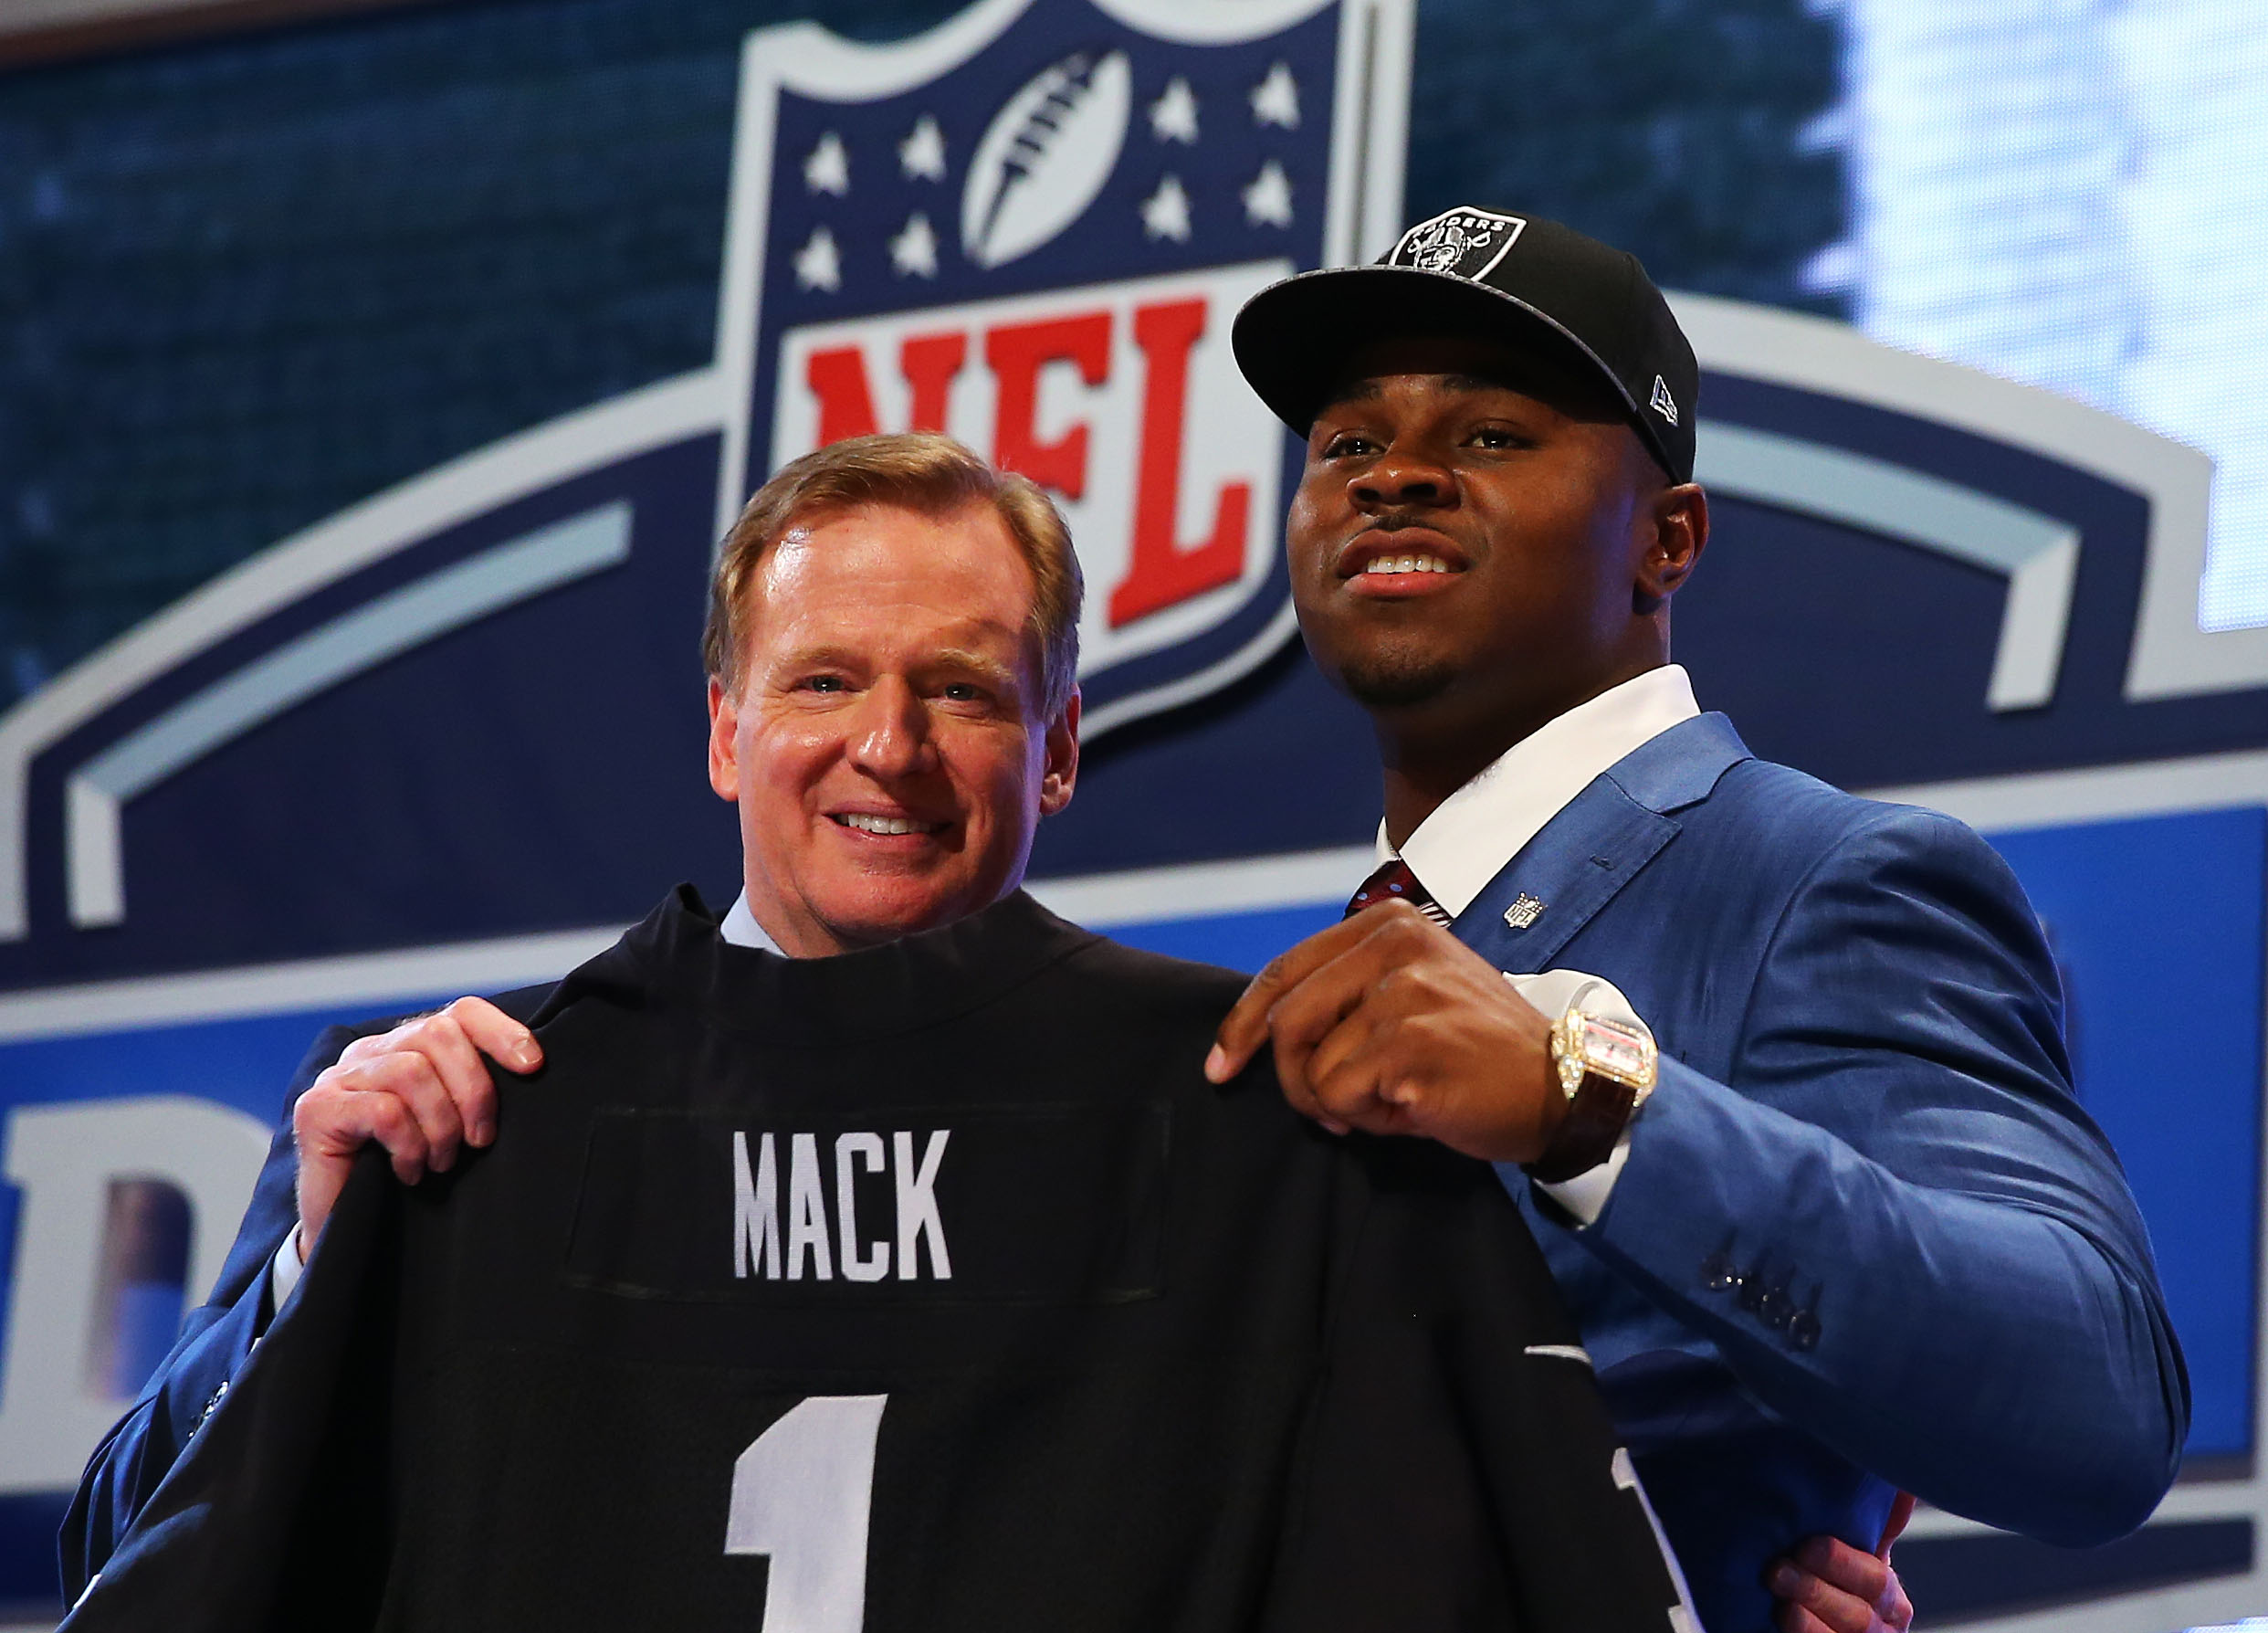 NEW YORK, NY - MAY 08: Khalil Mack of the Buffalo Bulls poses with NFL Commissioner Roger Goodell after he was picked #5 overall by the Oakland Raiders during the first round of the 2014 NFL Draft at Radio City Music Hall on May 8, 2014 in New York City. (Photo by Elsa/Getty Images)